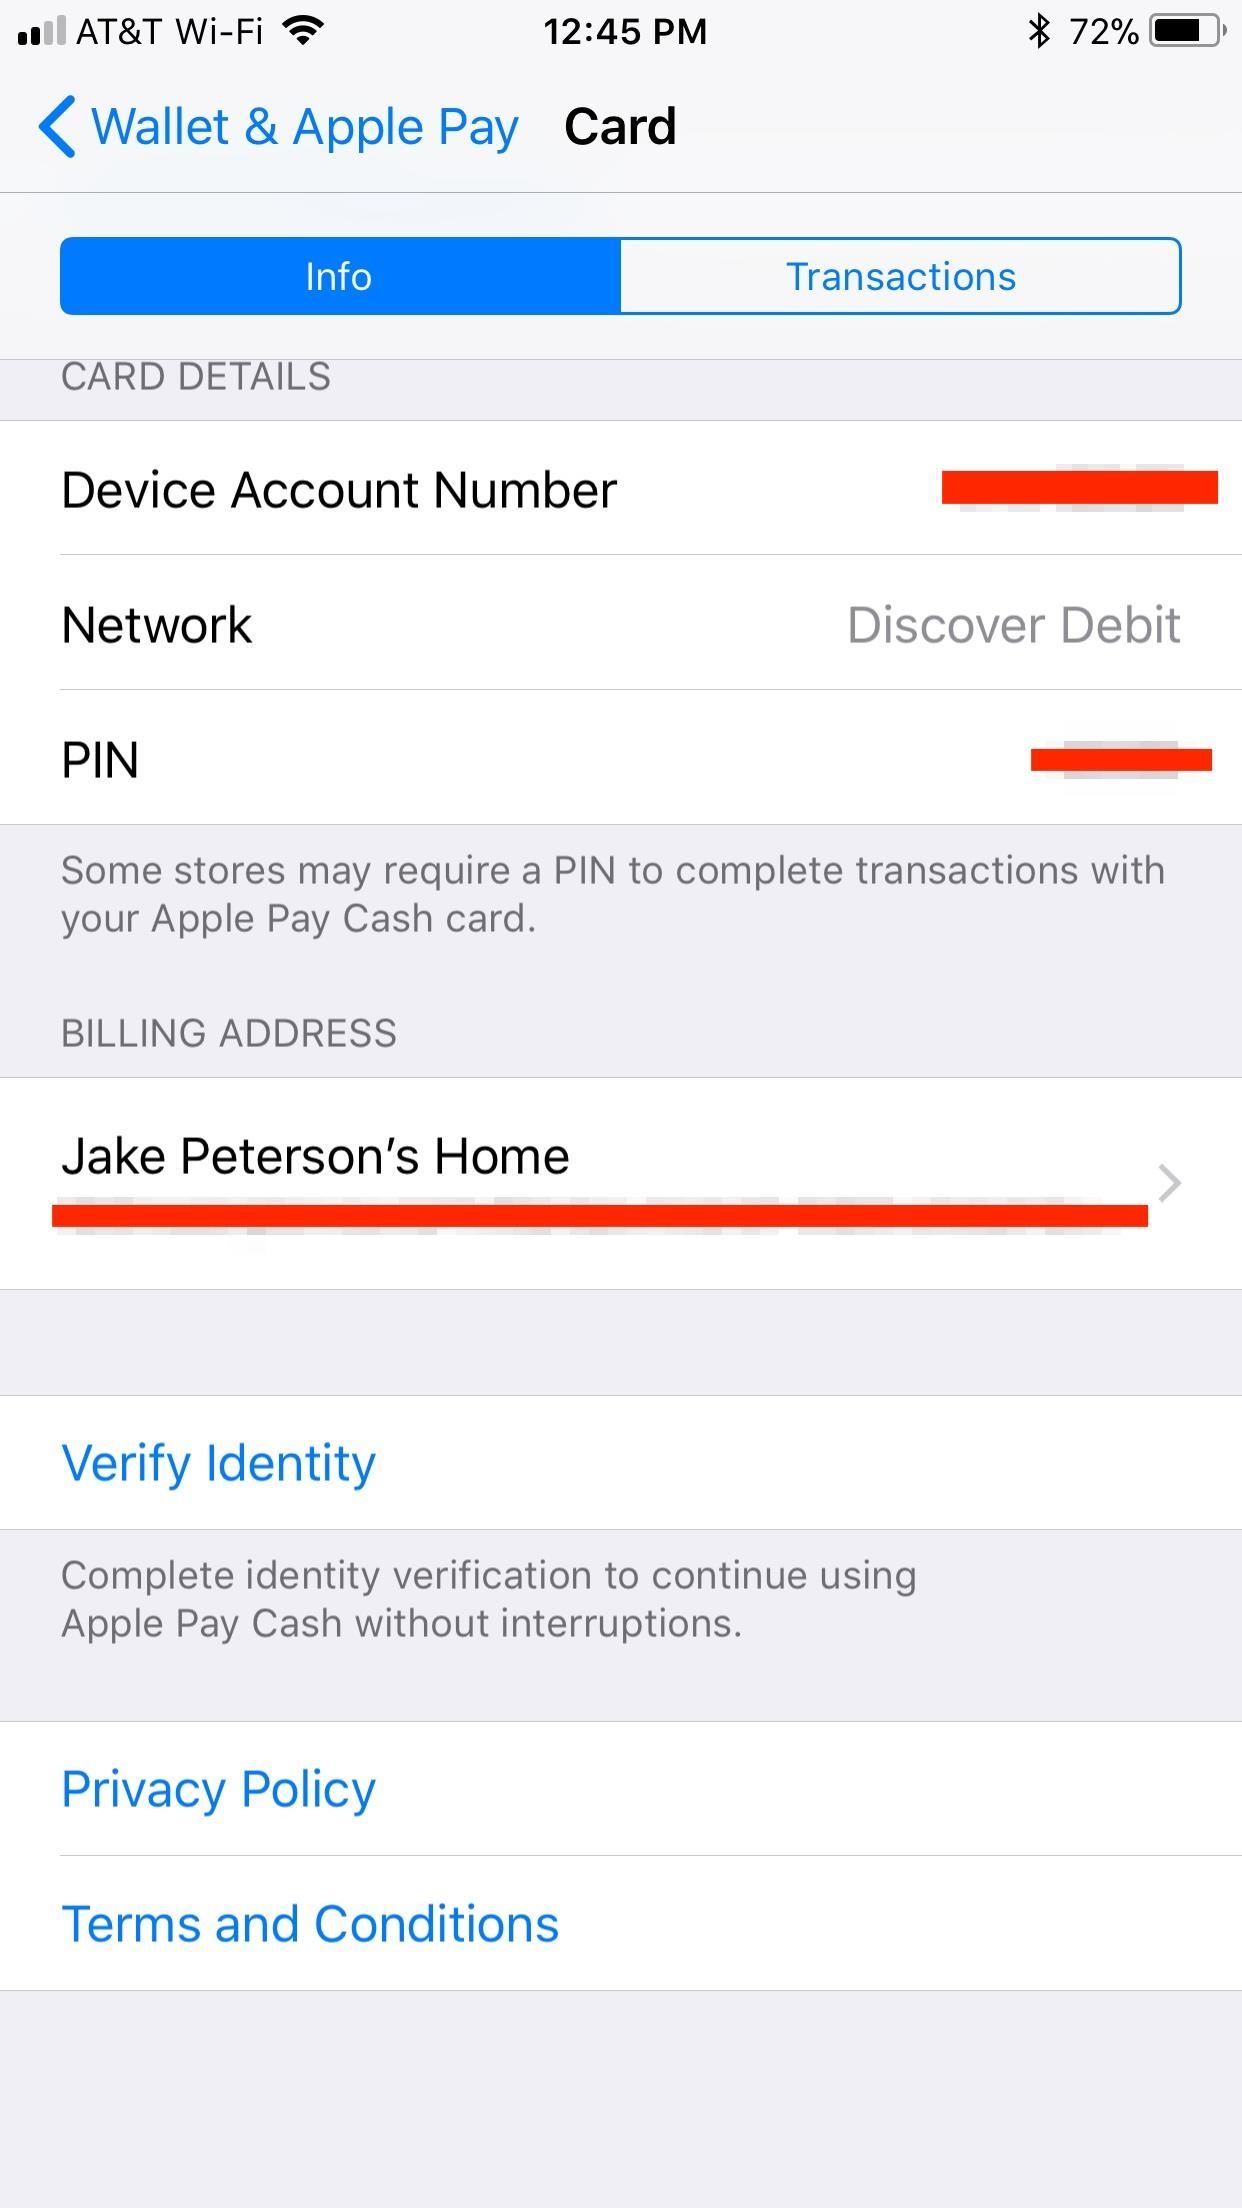 Apple Pay Cash 101: How to Verify Your Identity with Apple